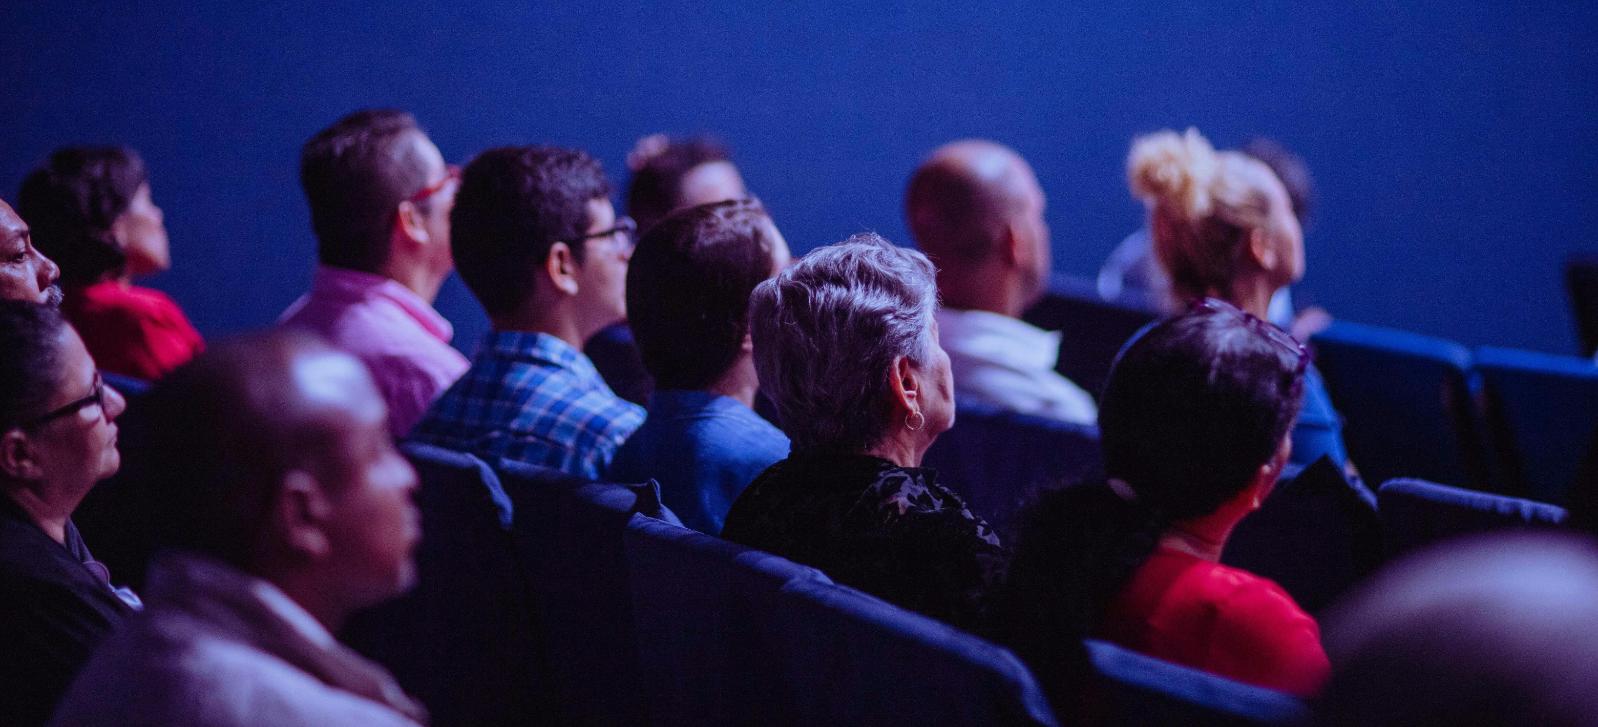 Group of people in a cinema screen